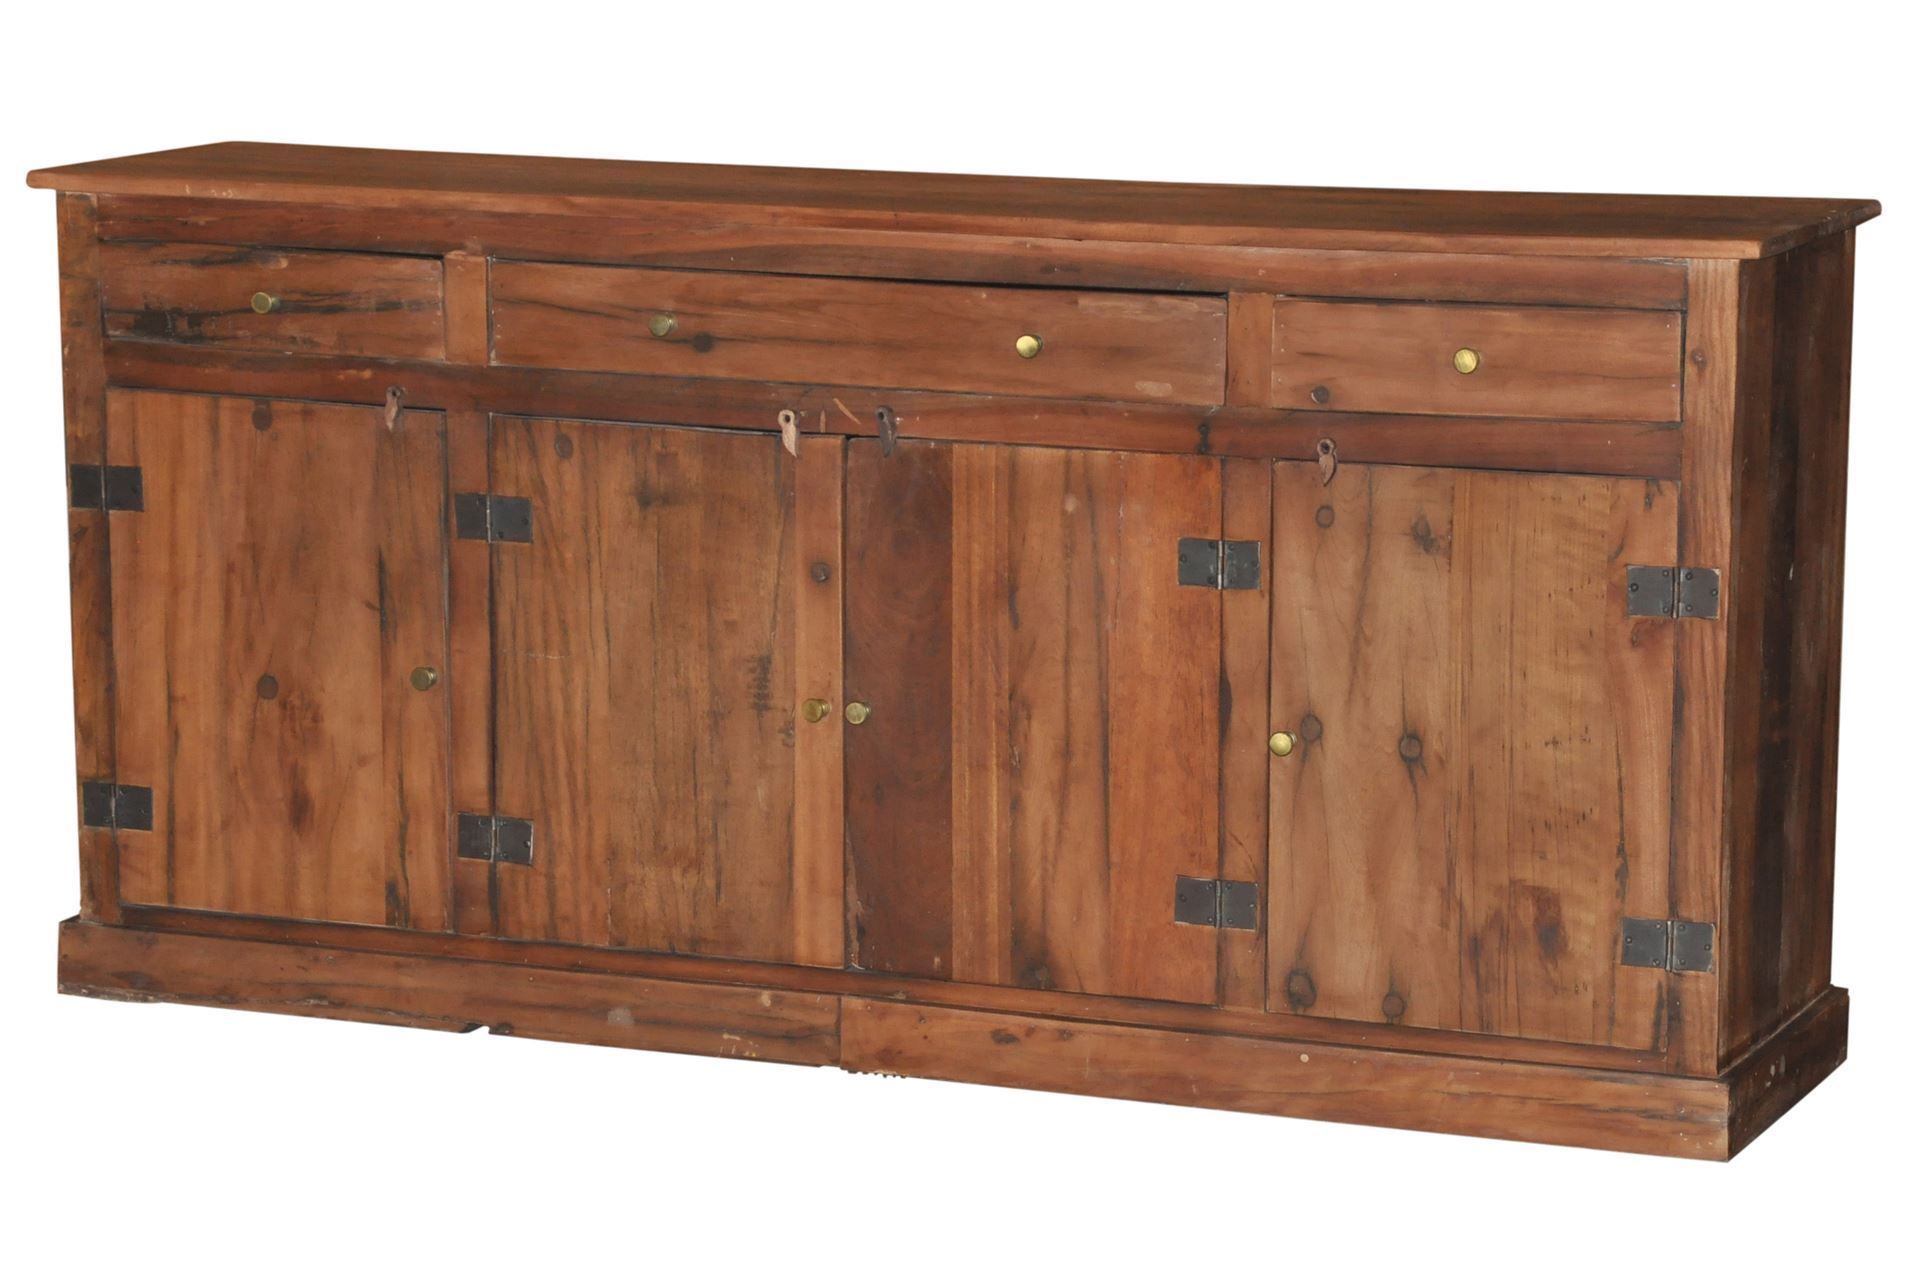 Otb Maaran Large Sideboard | Large Sideboard, Furniture Throughout Heurich 59" Wide Buffet Tables (View 8 of 15)